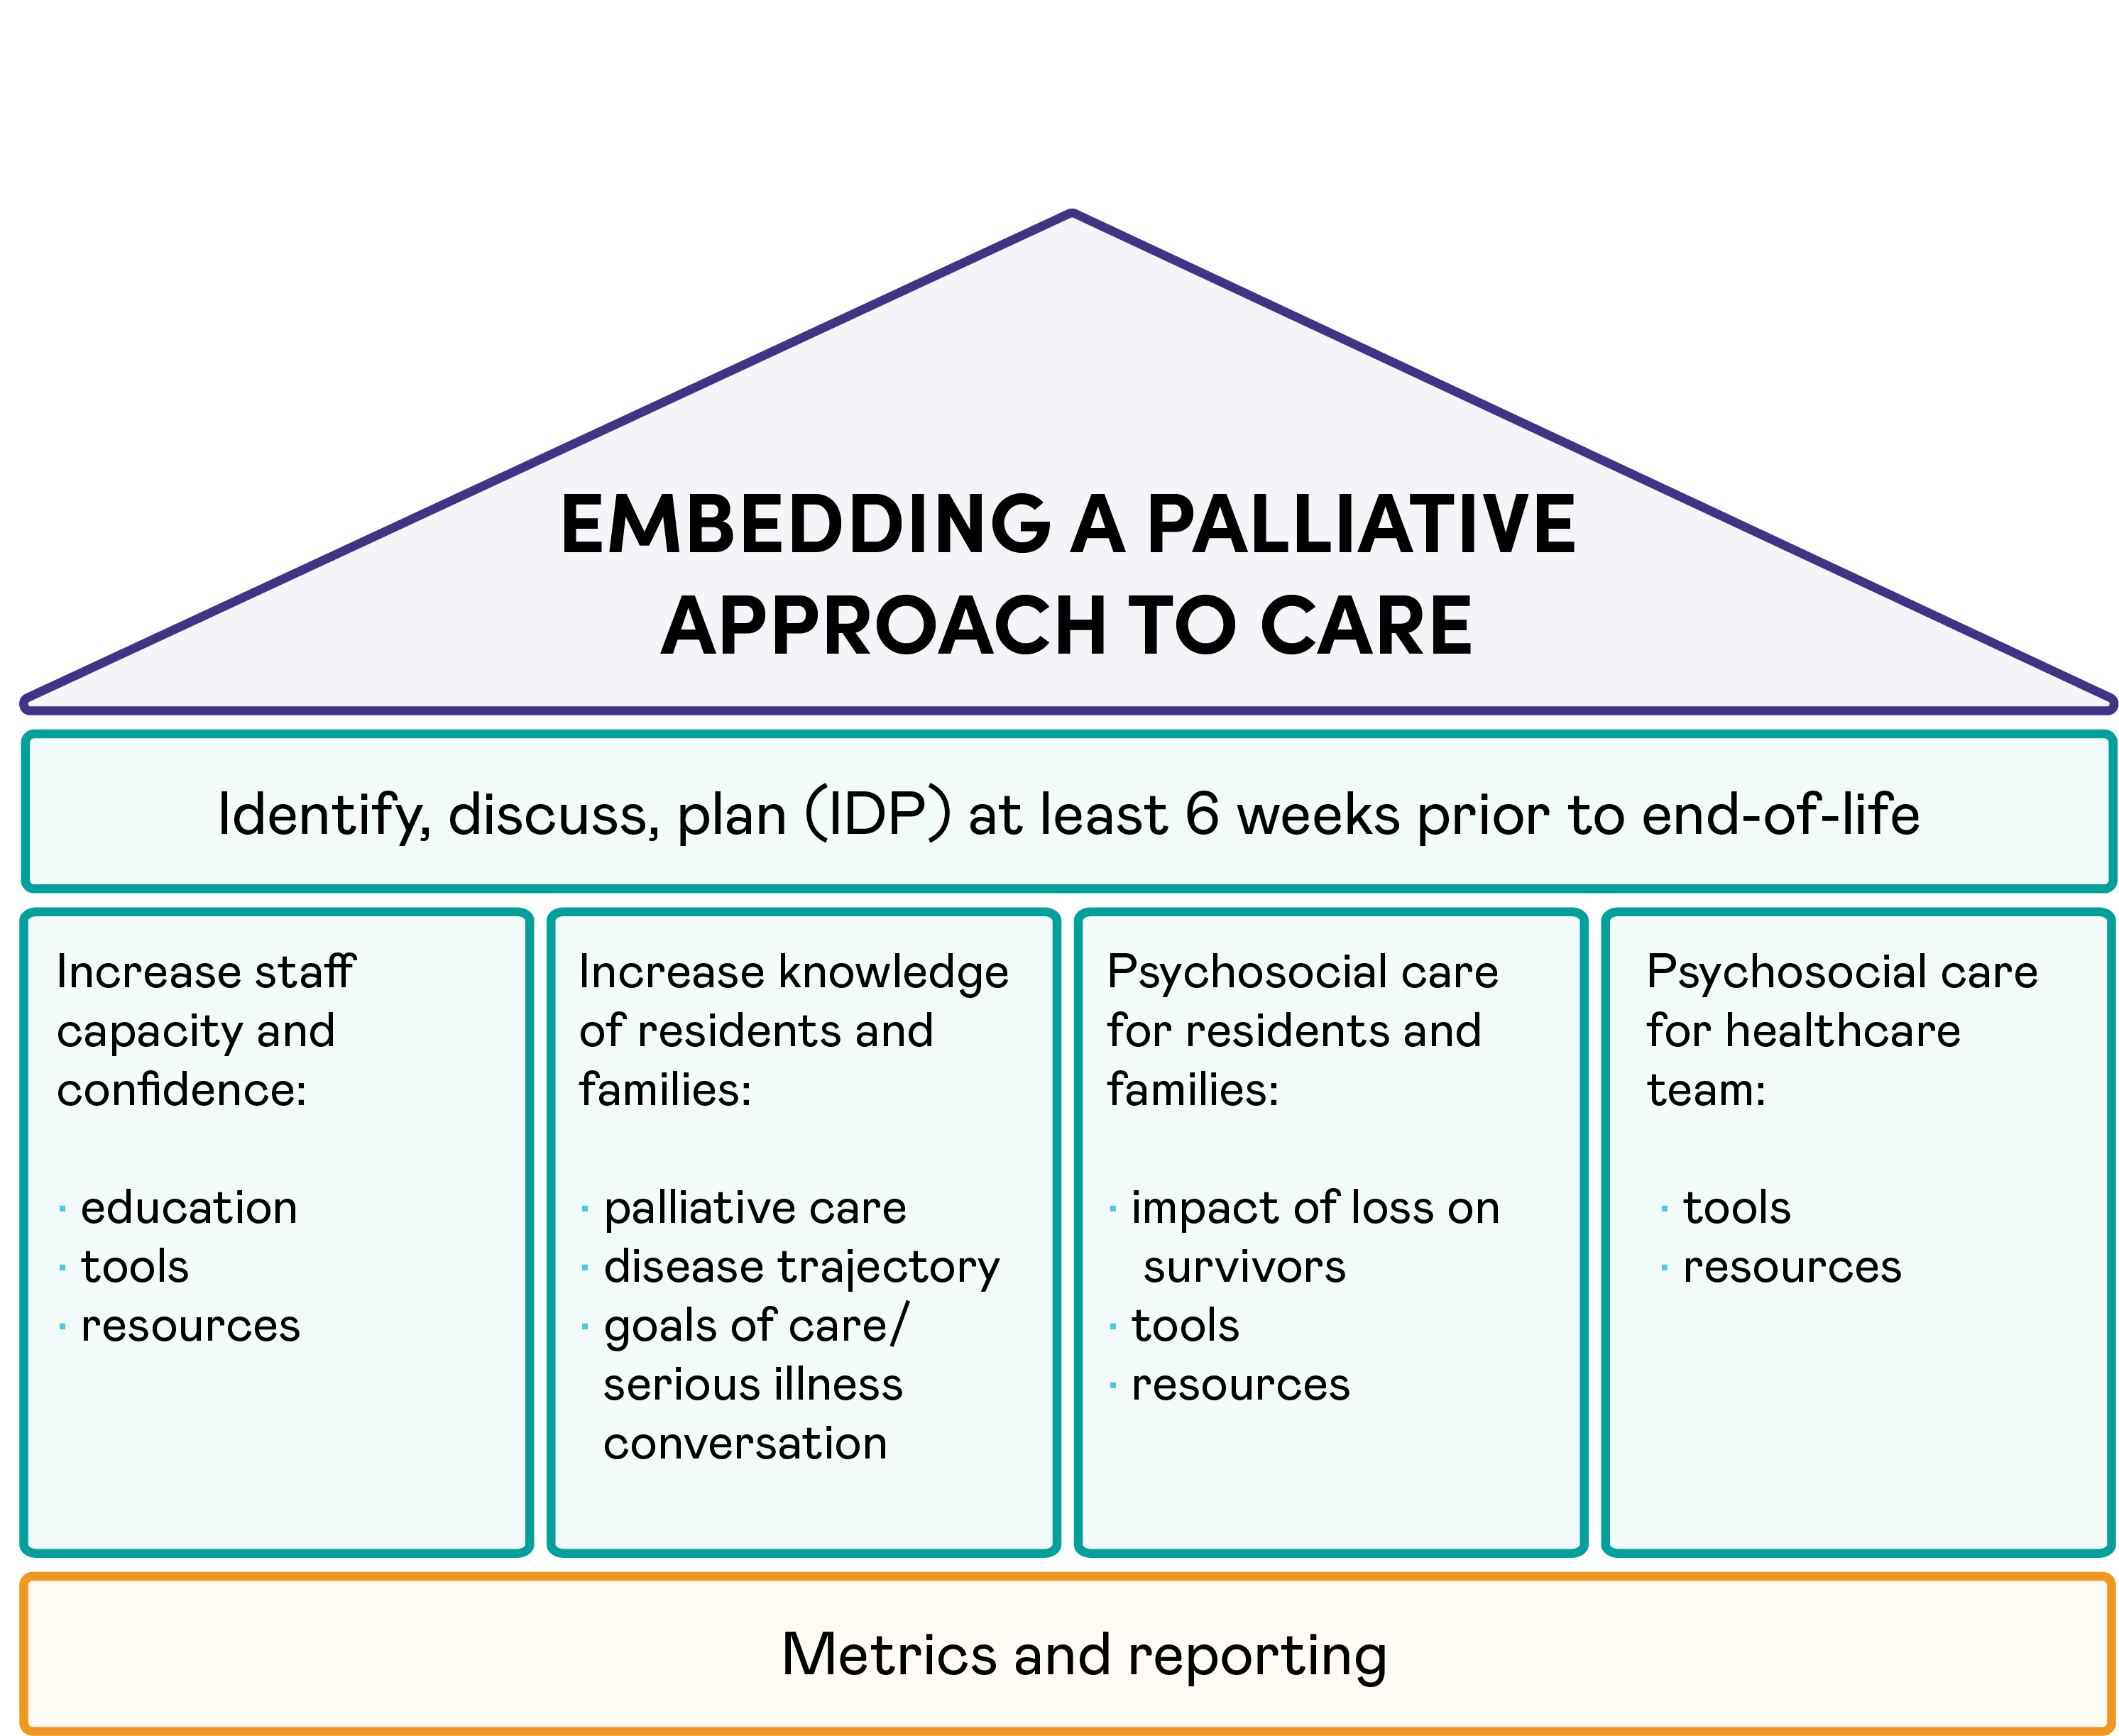 Diagram forming a house with four pillars. Roof of house: Embedding a palliative approach to care. Ceiling: Identify, discuss, plan (IDP) at least 6 weeks prior to end-of-life. Pillars of house: Increase staff capacity and confidence: education, tools, resources. Increase knowledge of residents and families: palliative care, disease trajectory, goals of care/serious illness conversation. Psychological care for residents and families: impact of loss on survivors, tools, resources. Psychological care for healthcare team: tools, resources. Foundation of house: Metrics and reporting.